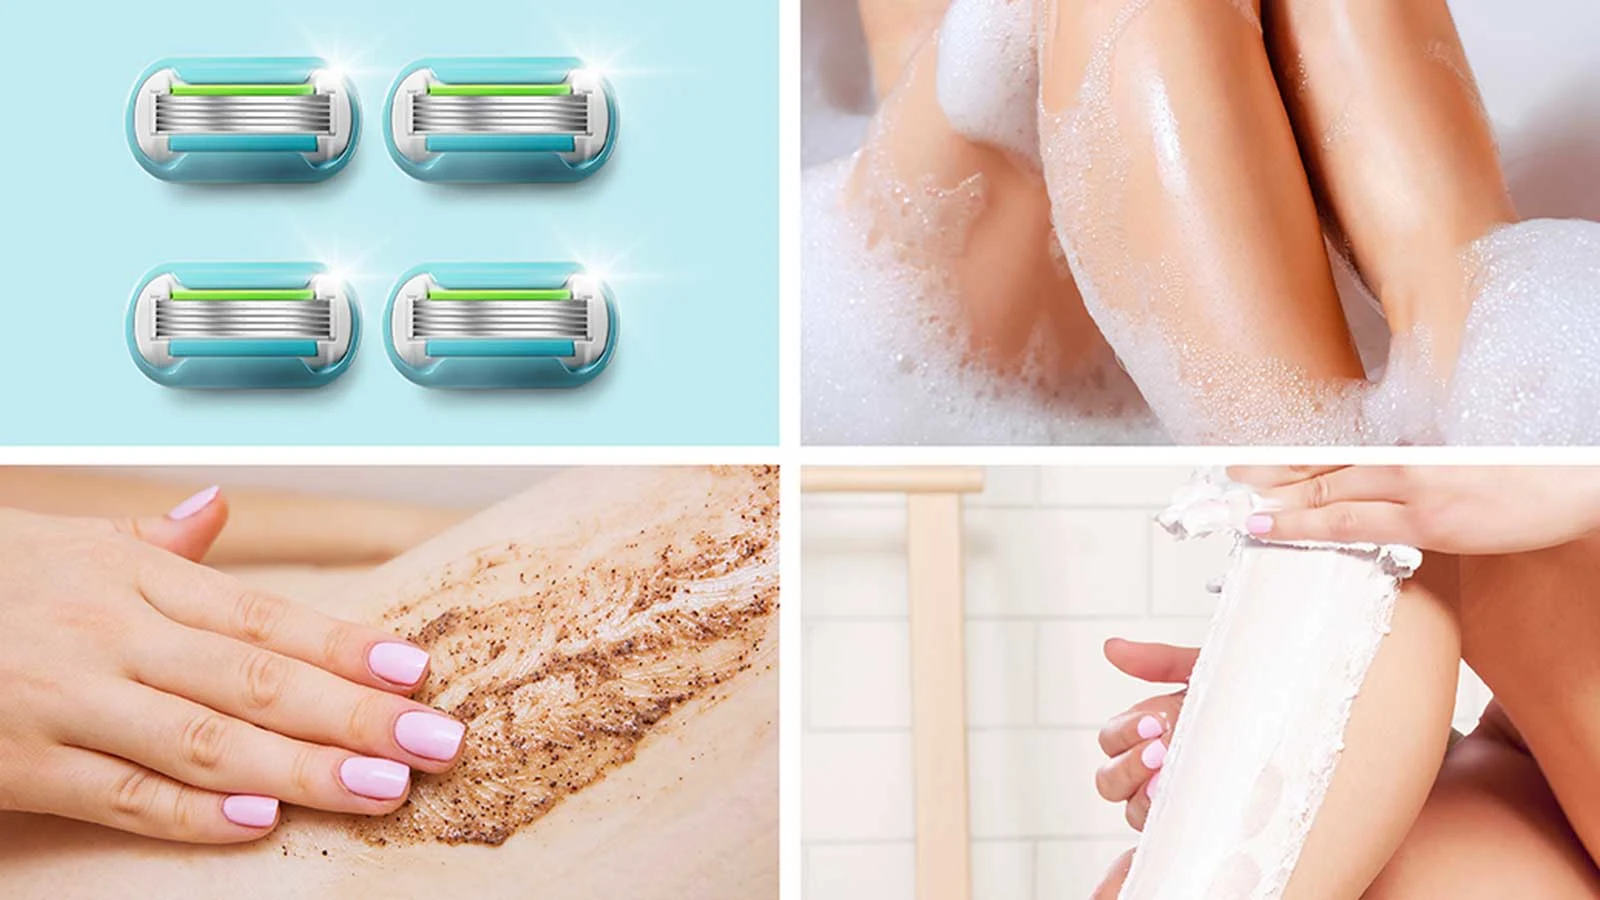 4 oval 5 bladed razor heads with a blue lubrastrips, female legs in a bubbly bath, woman applying brown scrubbing product to her skin, woman wiping off hair removal product from her leg